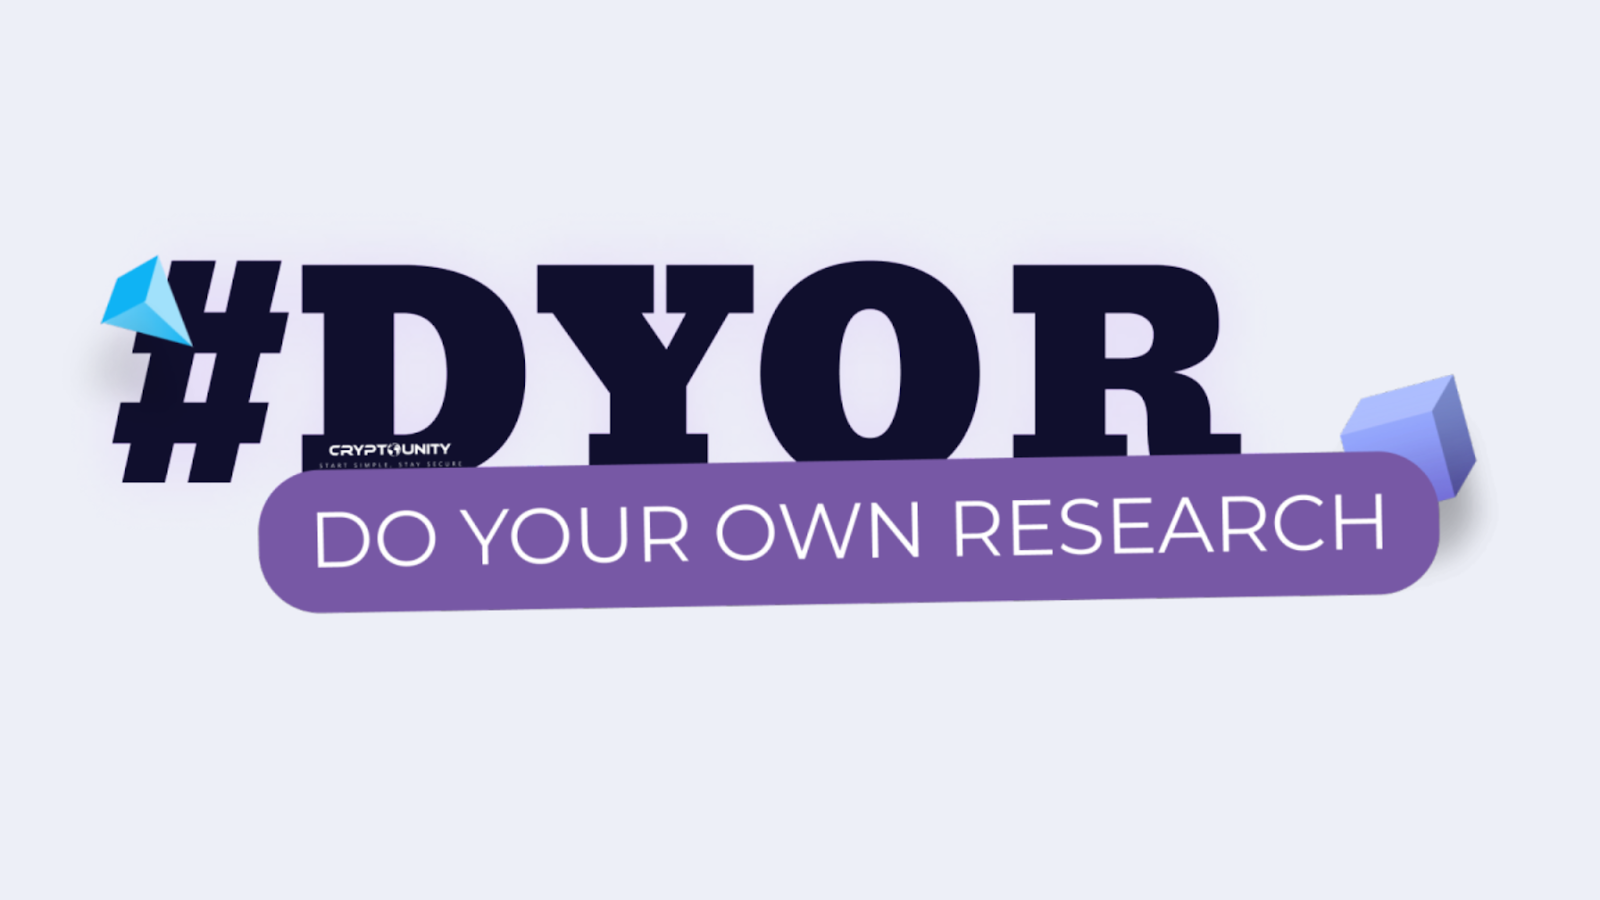 What is Doing Your Own Research (DYOR)?